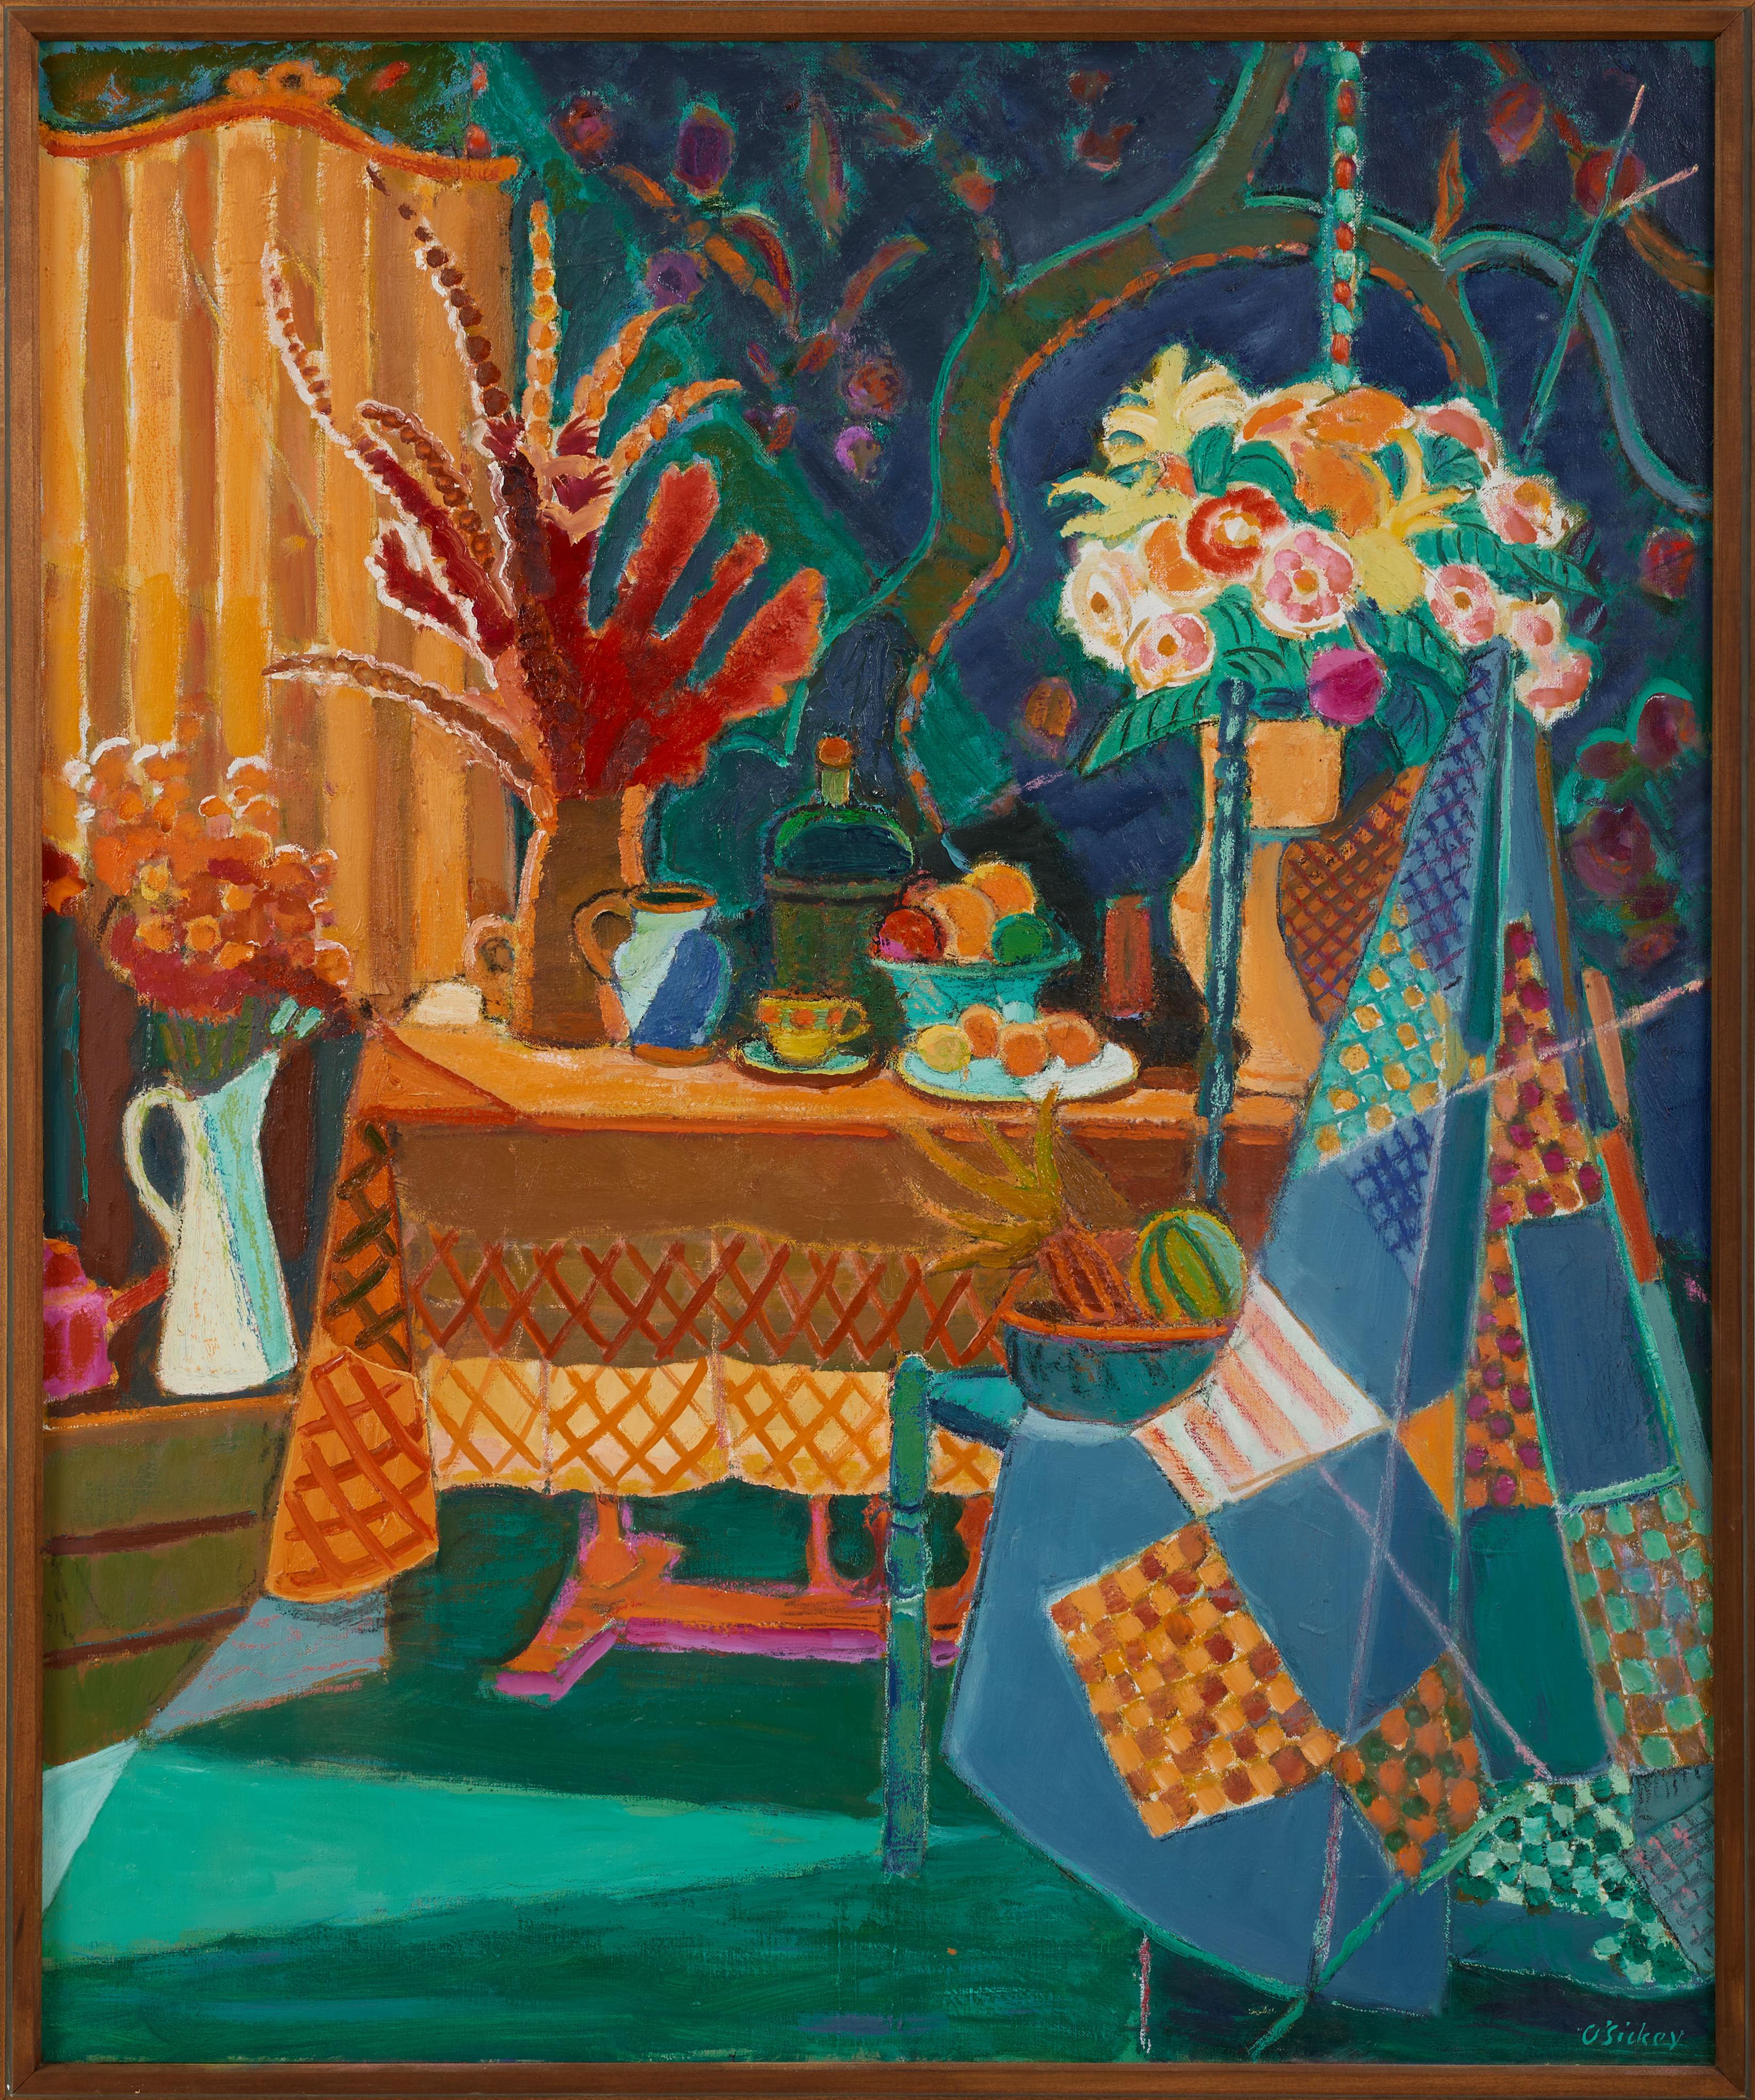 Still Life with Fruit & Patterned Blanket, Exterior Landscape and Table scene - Painting by Joseph O'Sickey